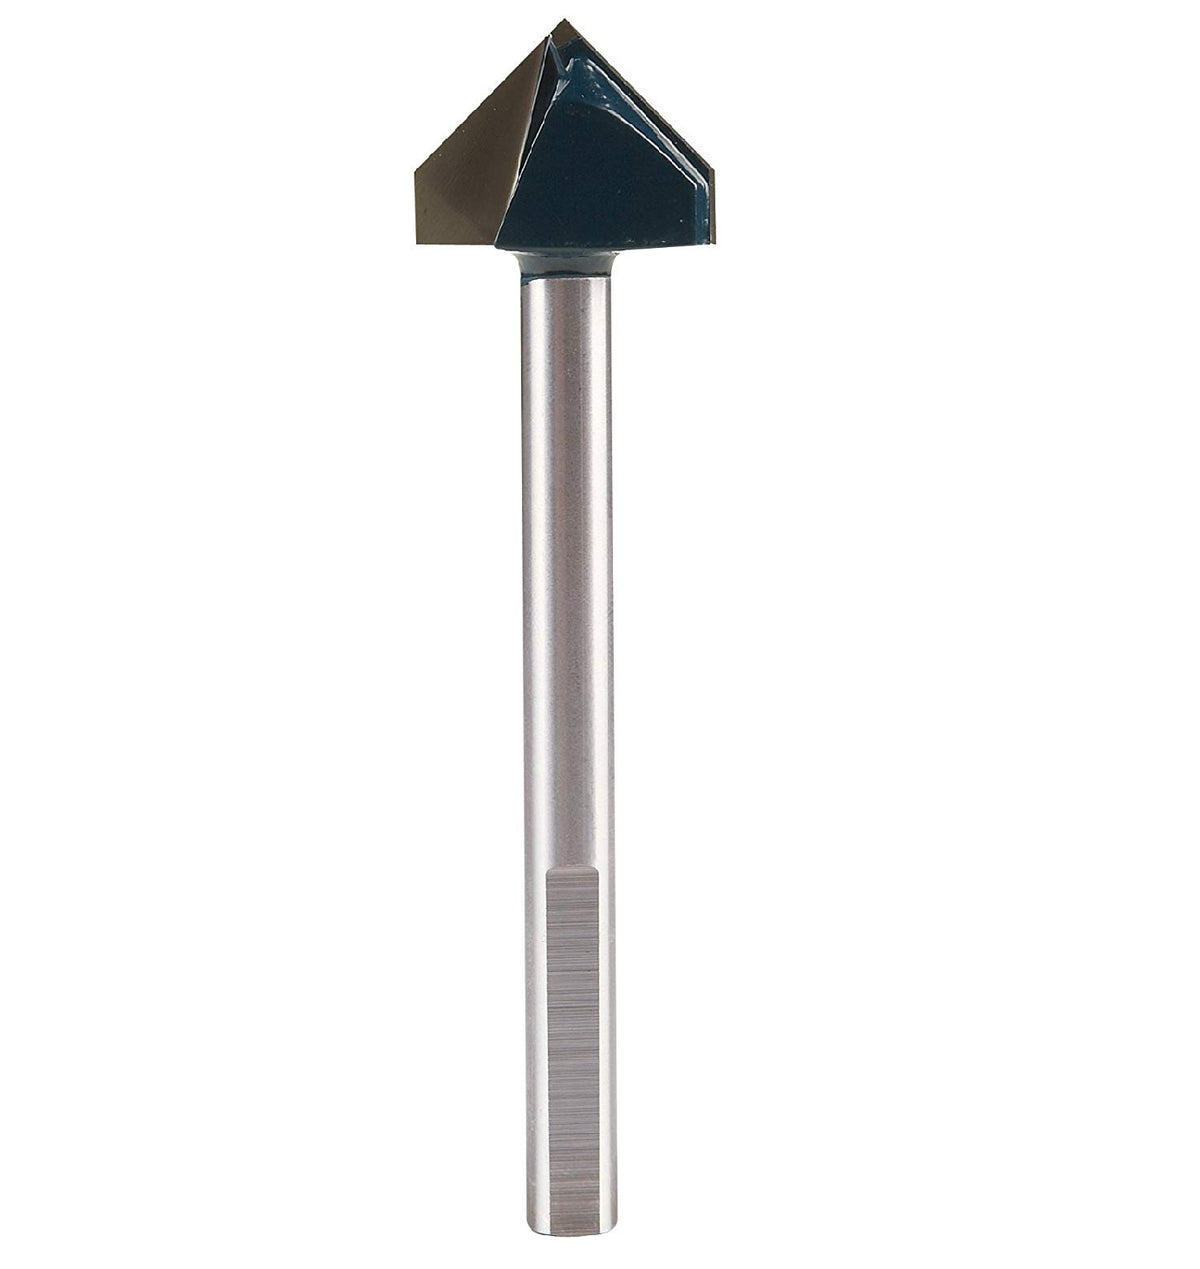 Bosch GT1000 Glass and Tile Bit, 1 Inch